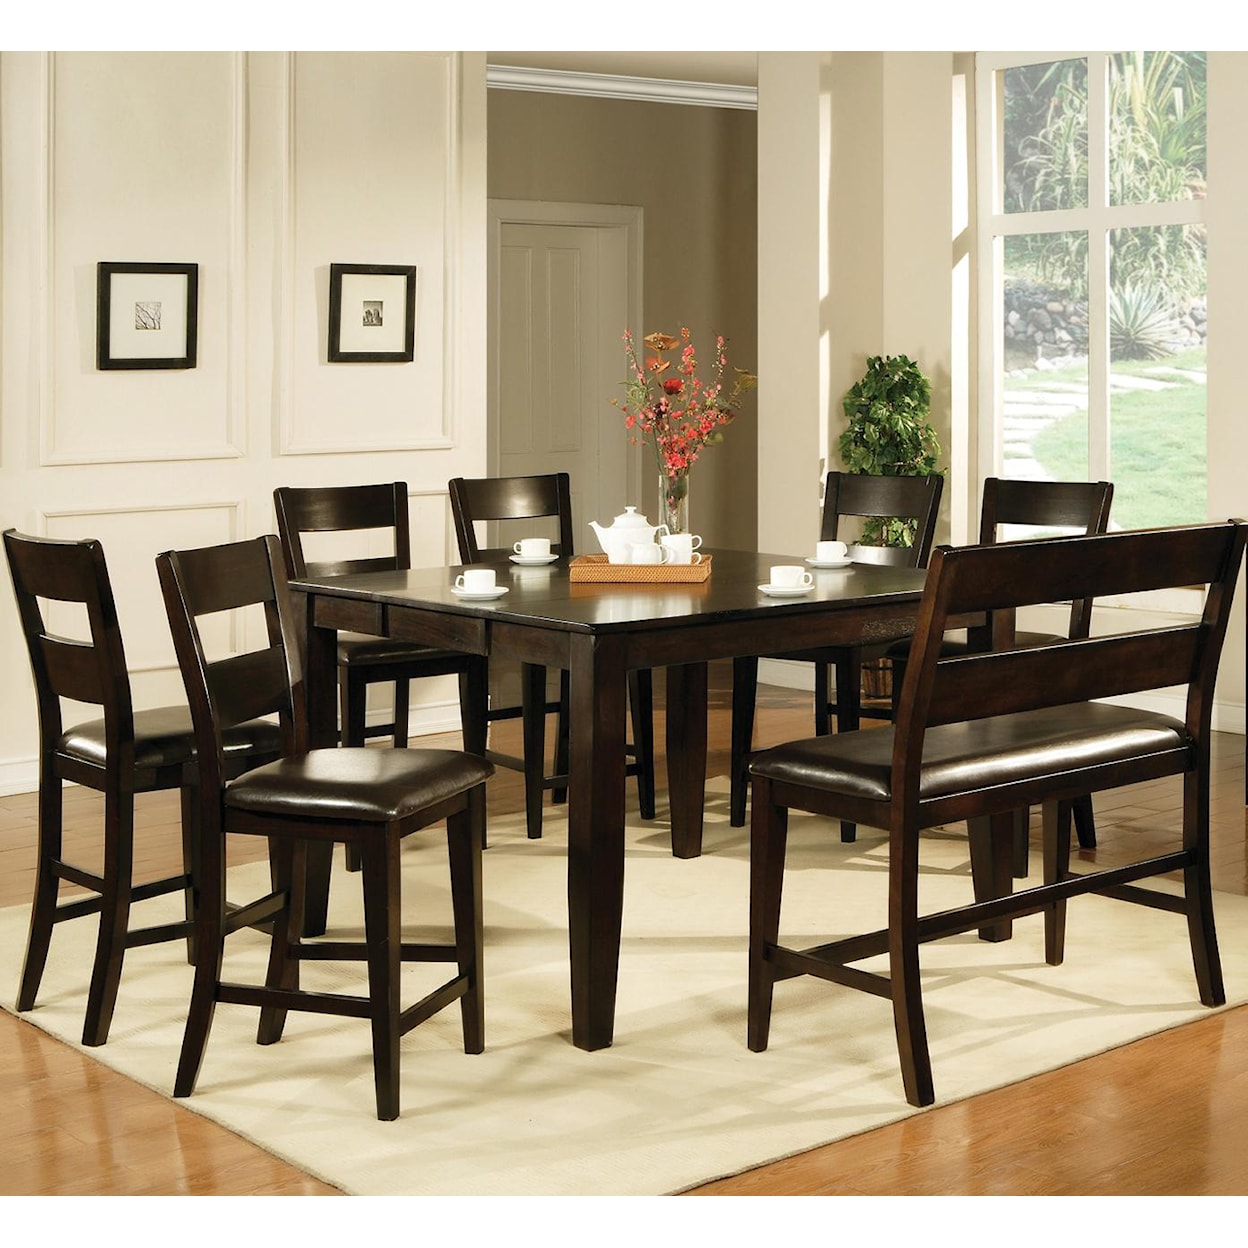 Steve Silver Victoria  8 Piece Counter Height Dining Set